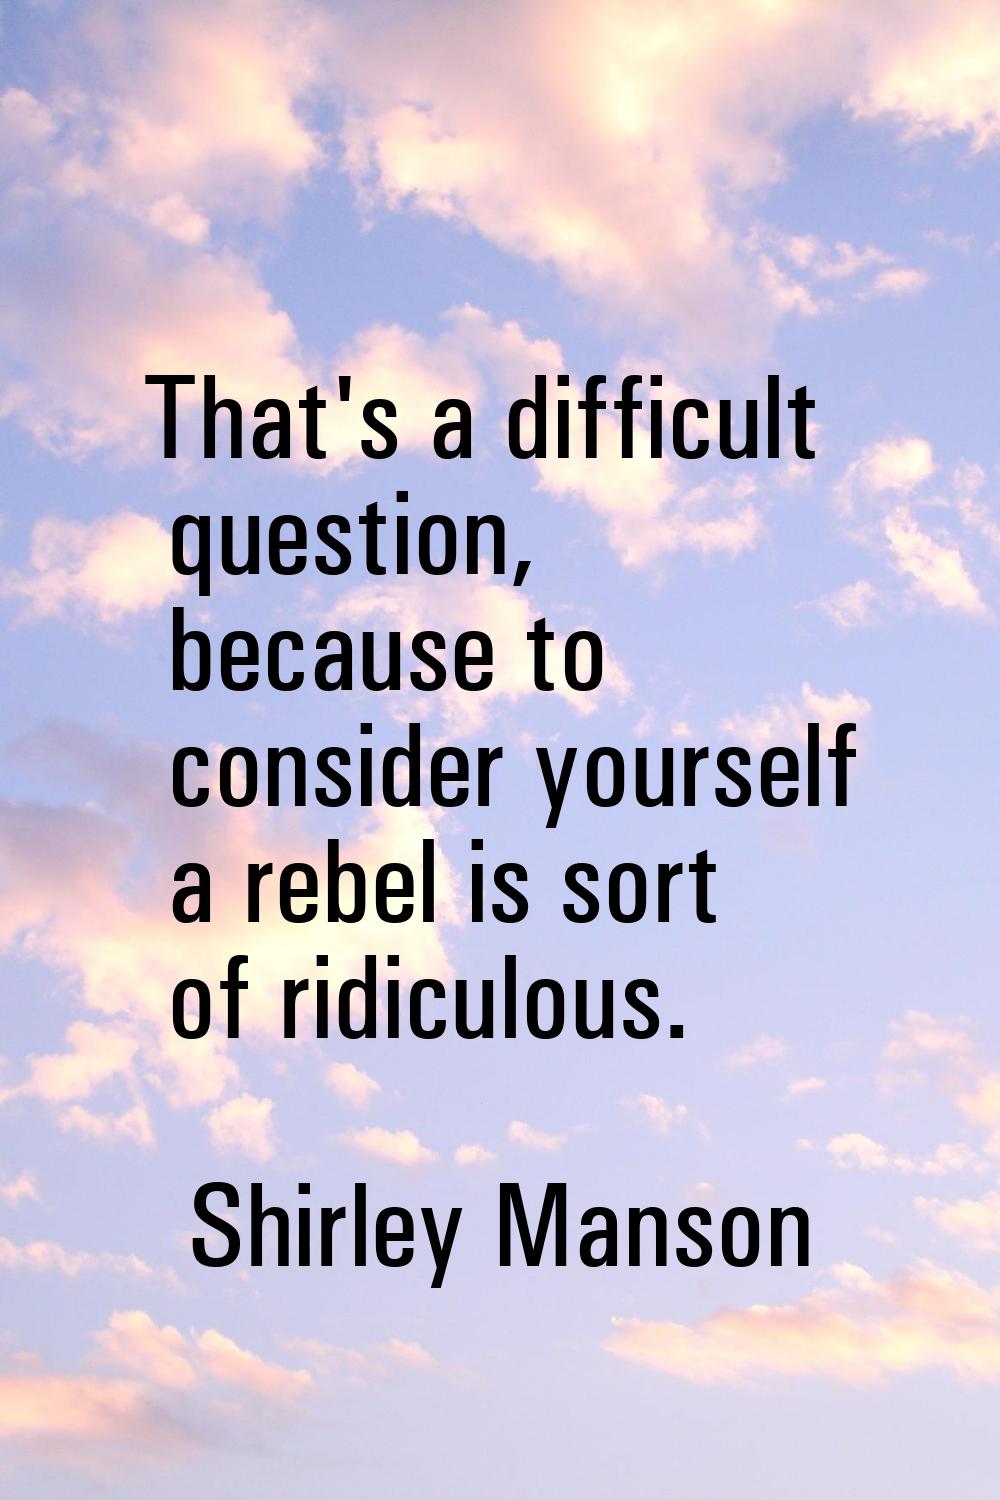 That's a difficult question, because to consider yourself a rebel is sort of ridiculous.